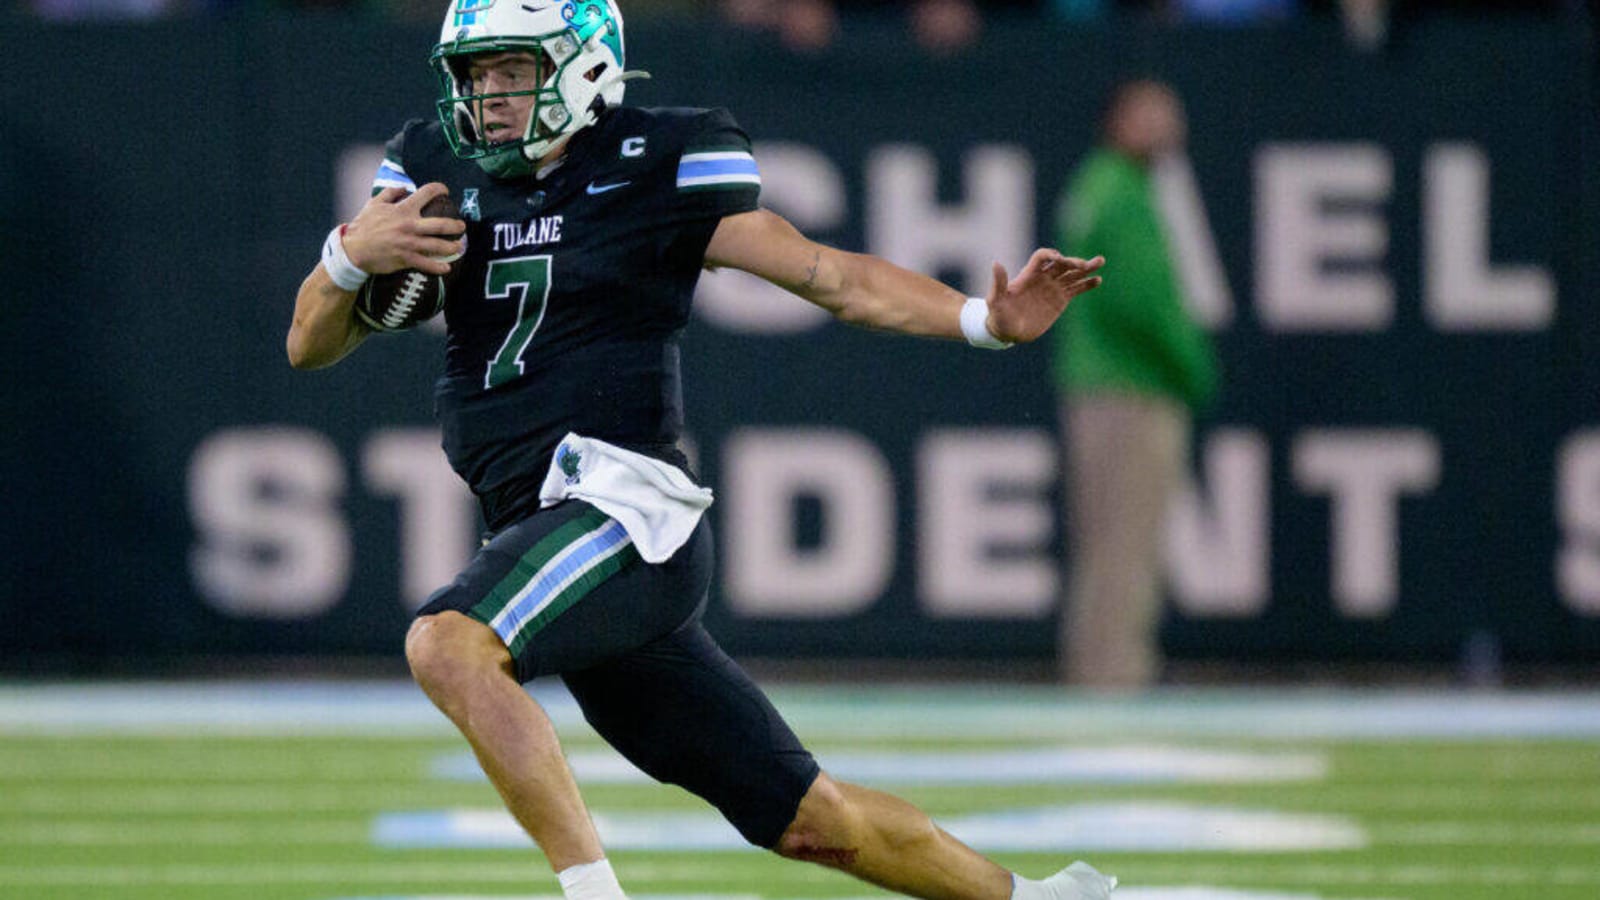 How to watch Tulane vs SMU via free live streaming today: College Football start time, stats, and TV channel